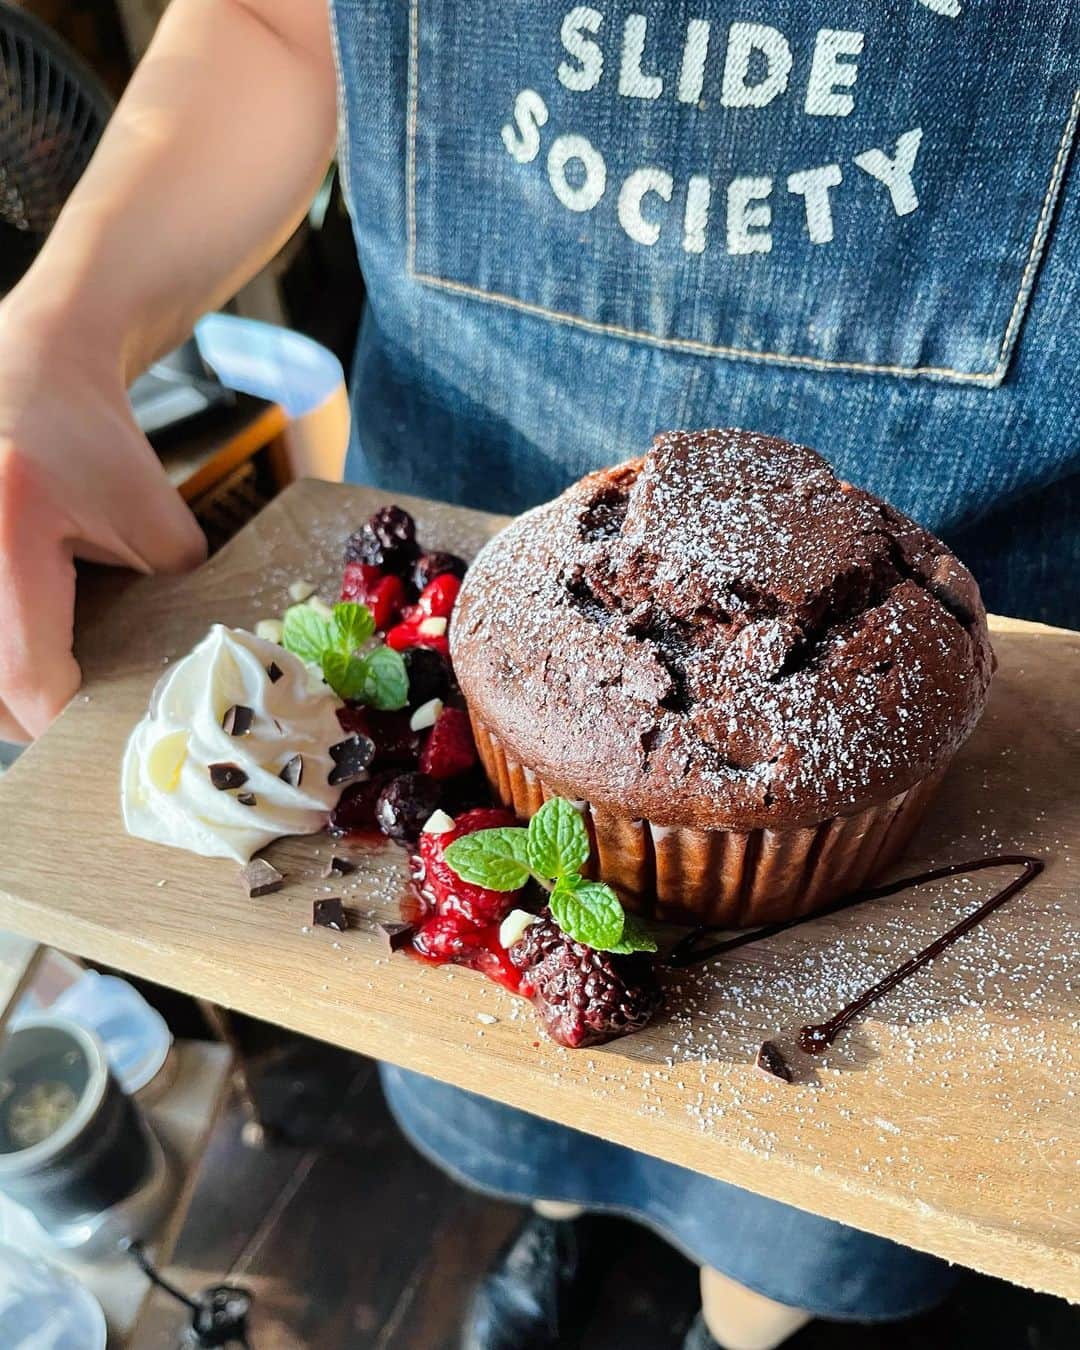 PORT of CALL Cafe&Store Tokyoのインスタグラム：「【POC Menu】﻿ Chocolate Muffin🧁🍫 #カフェ　#ランチ #portofcall #portofcalldaikanyama #lunch #shibuya  #cafe #burger #platelunch #foodporn #dessert #nomeatnolife #tokyolife #Foodporn #foodie #California #Chilling #waffles #original#casualstyle#brunch#food #pasta #cheese##classic#america#comfortfood#cafecasual #cafe」